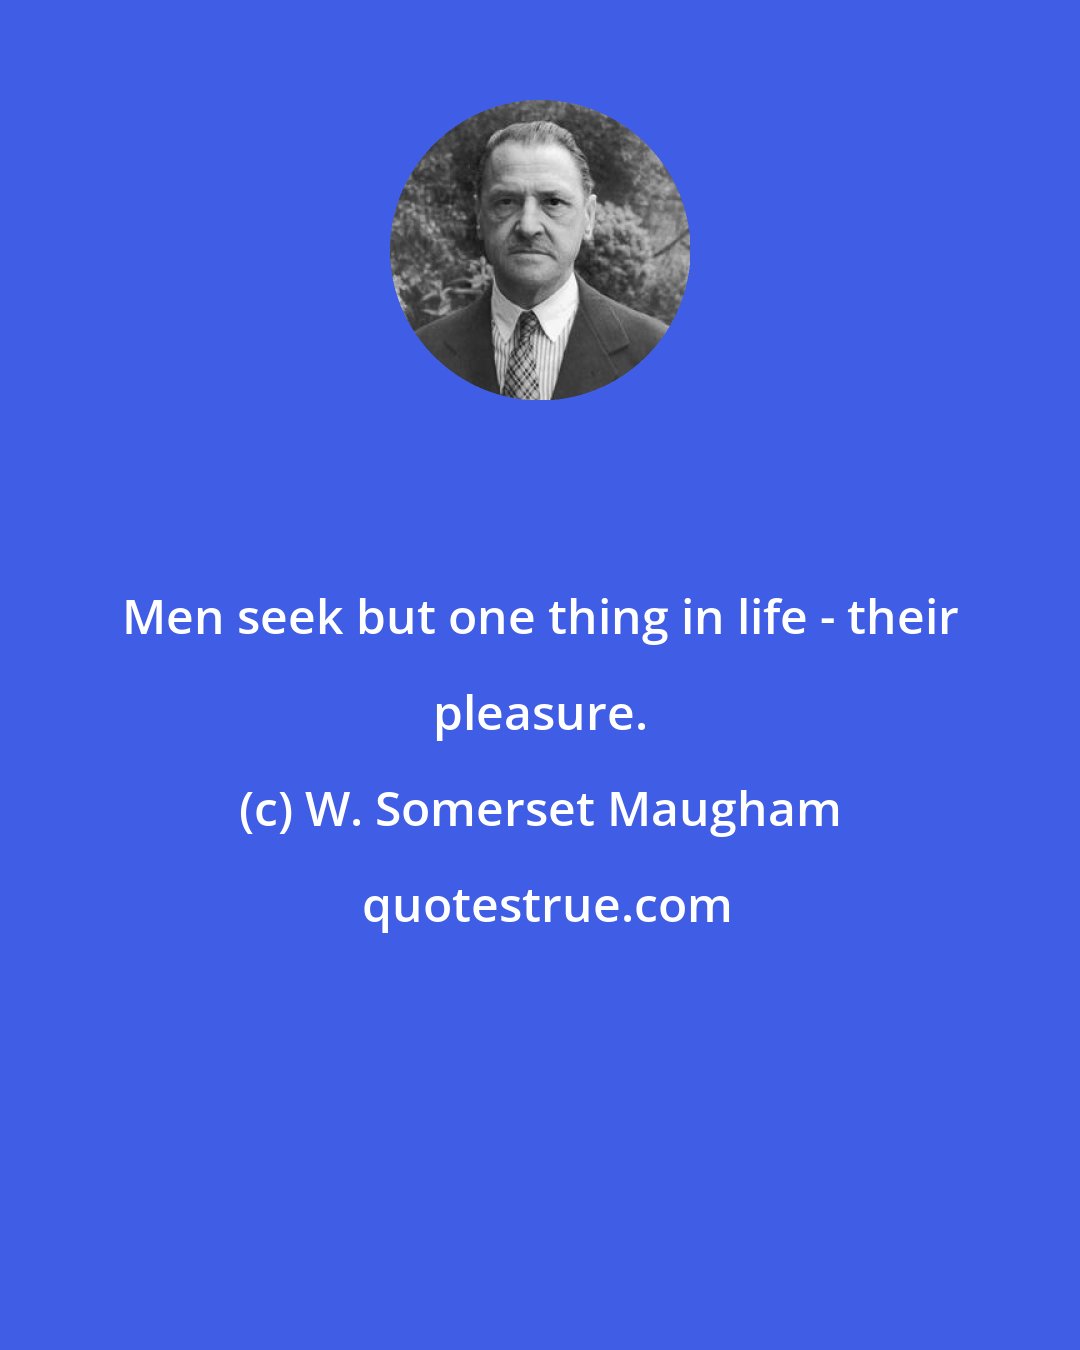 W. Somerset Maugham: Men seek but one thing in life - their pleasure.